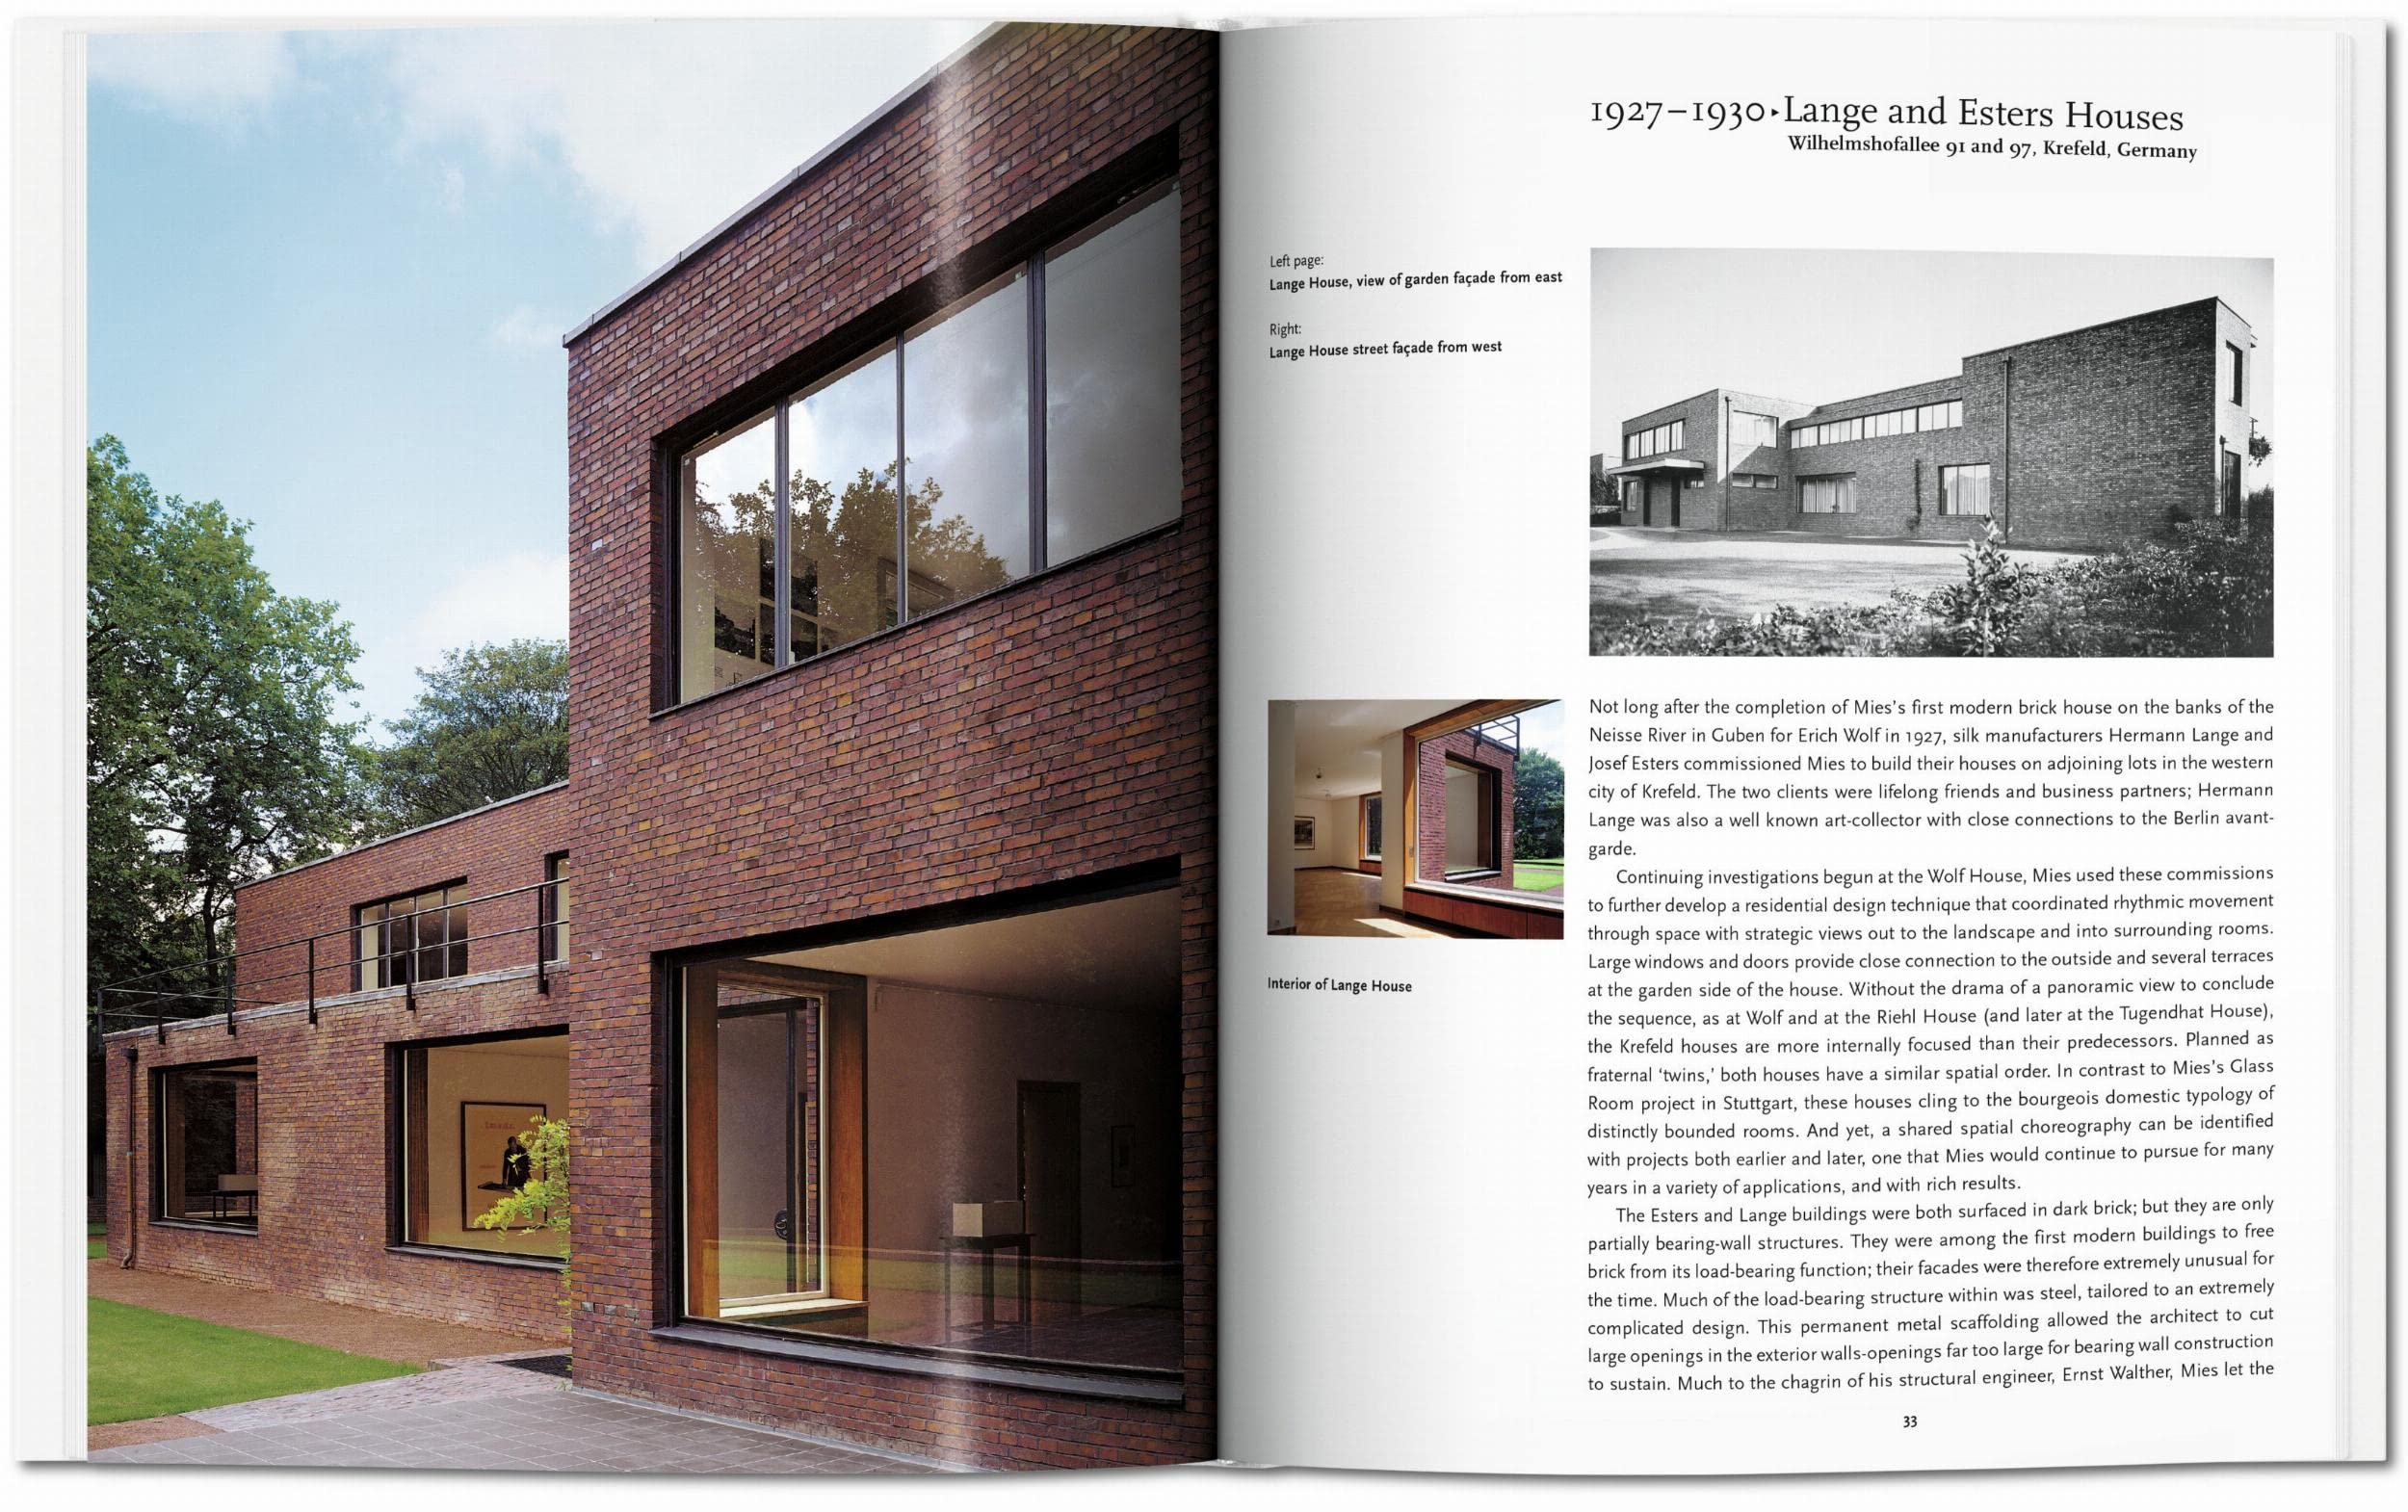 Mies Van Der Rohe: 1886-1969: the Structure of Space